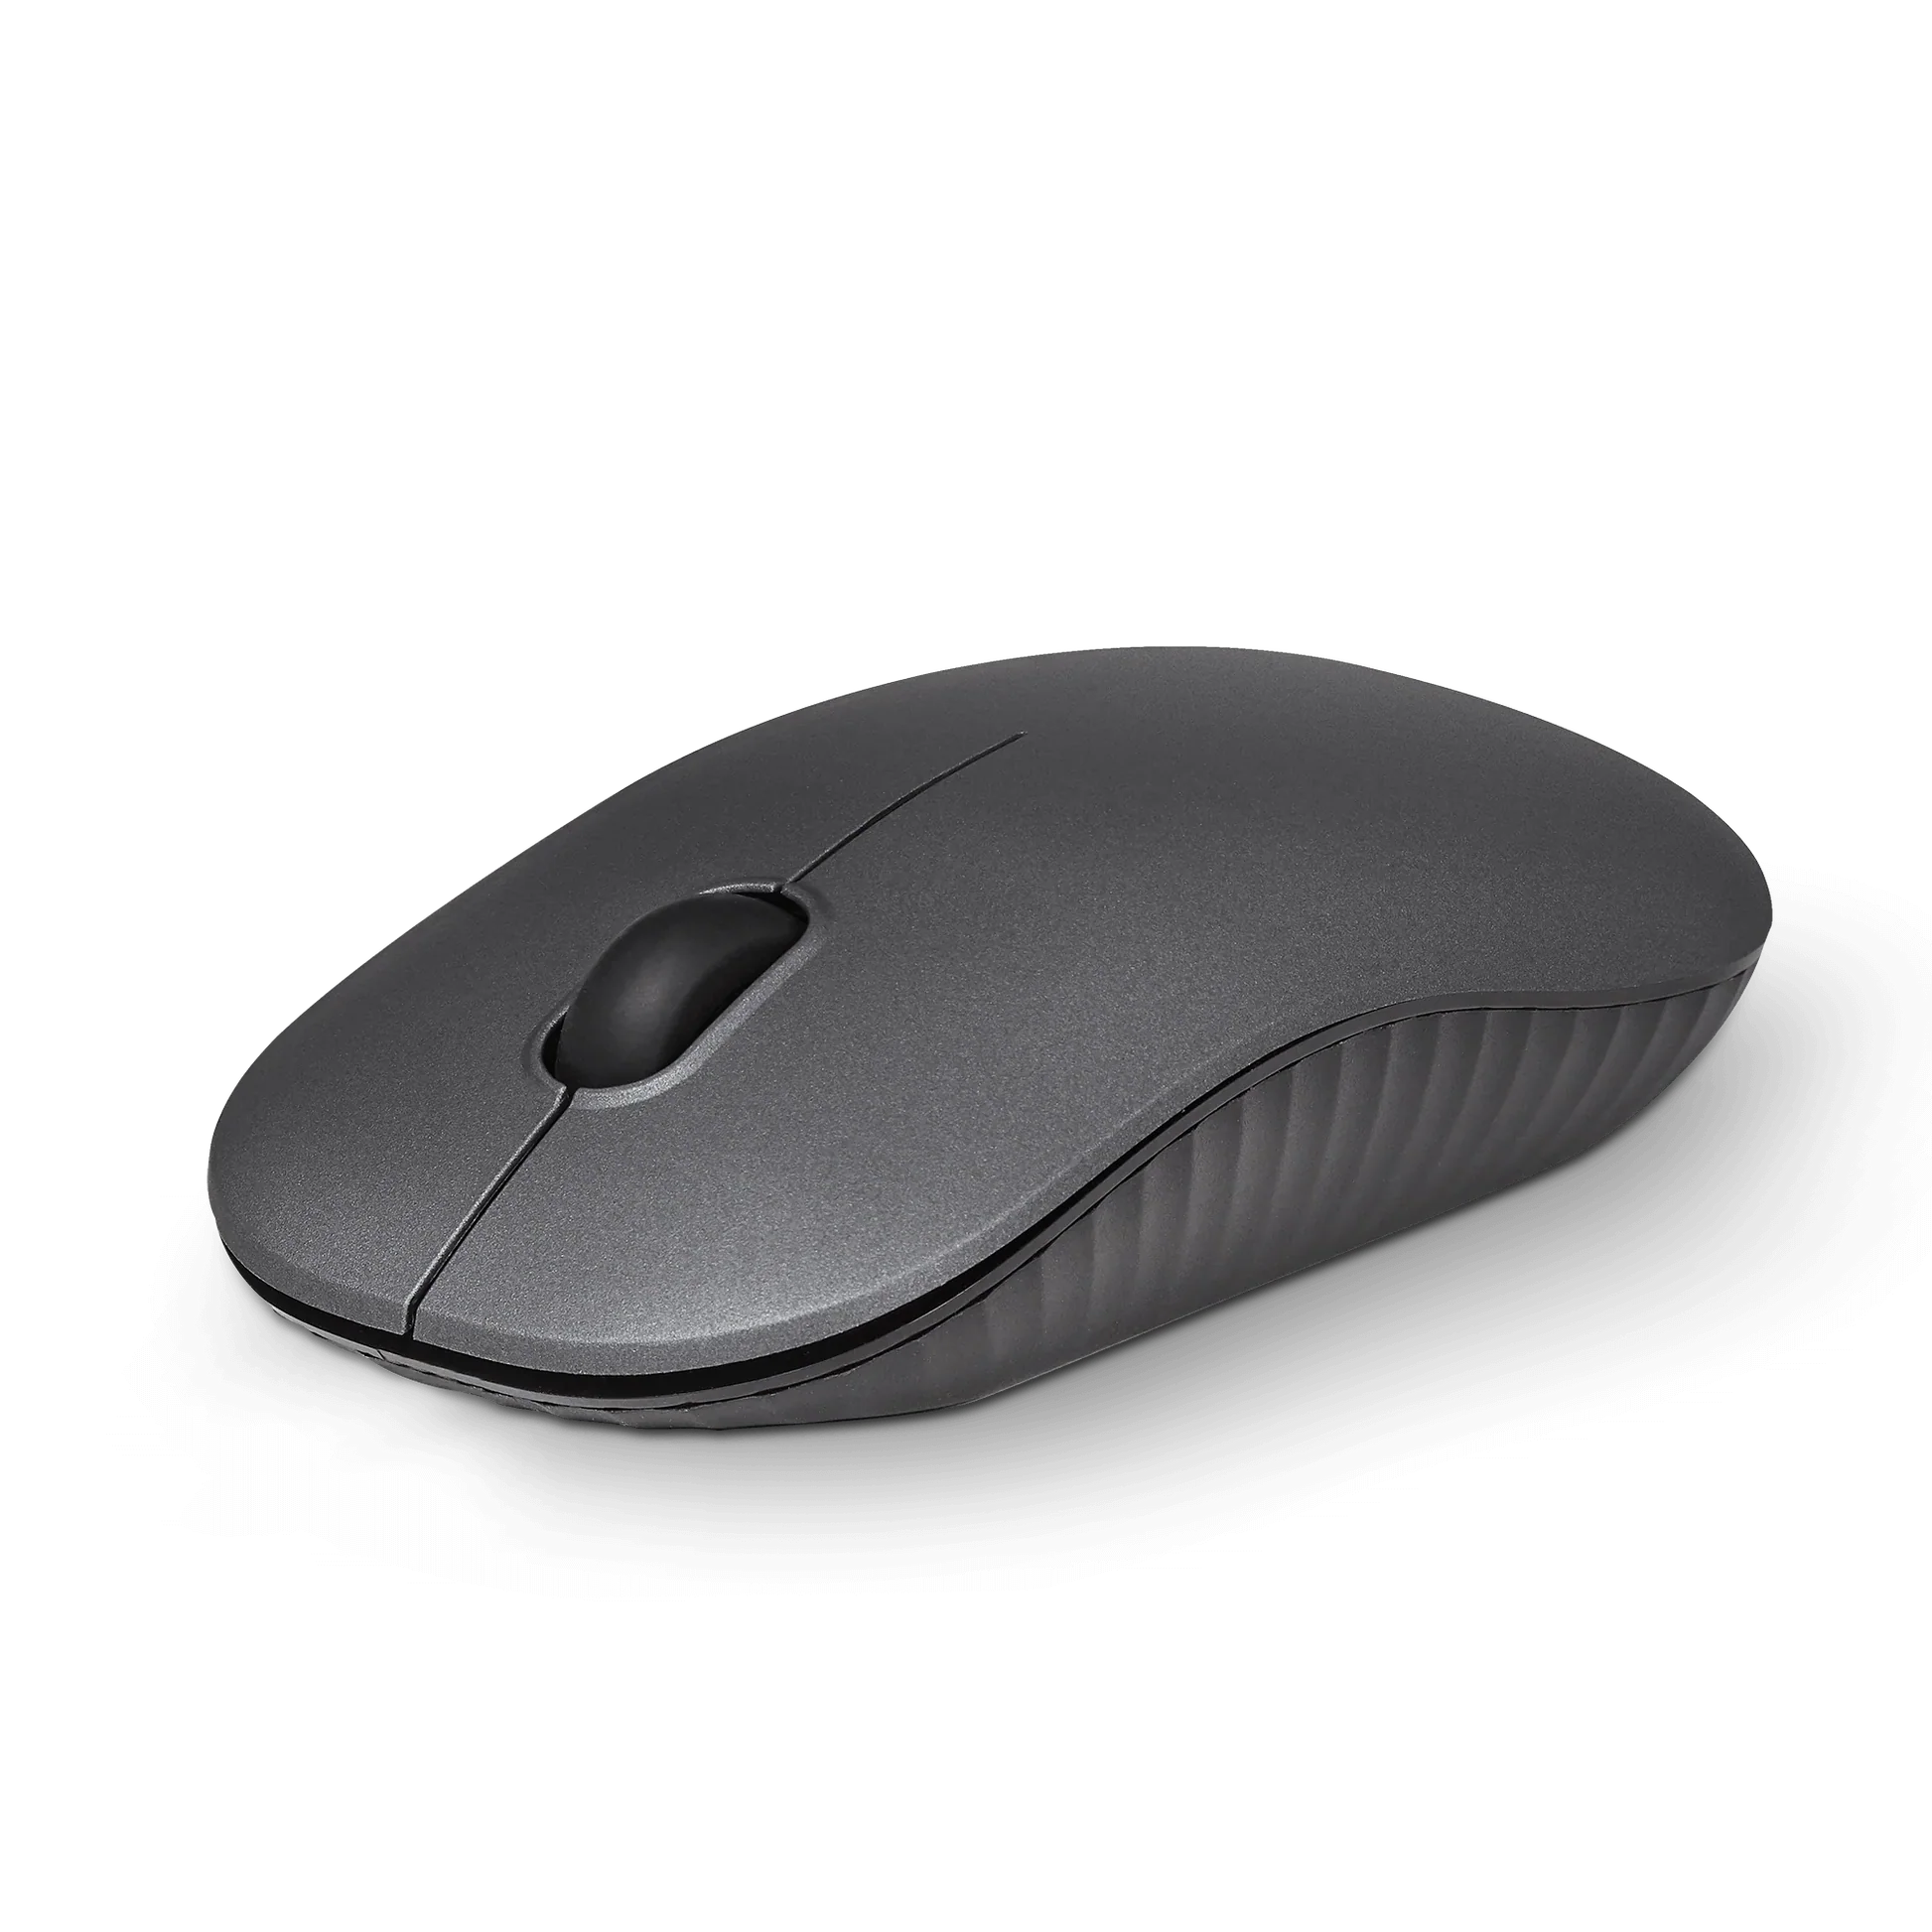 Prolink PMW 5009 Wireless Mouse